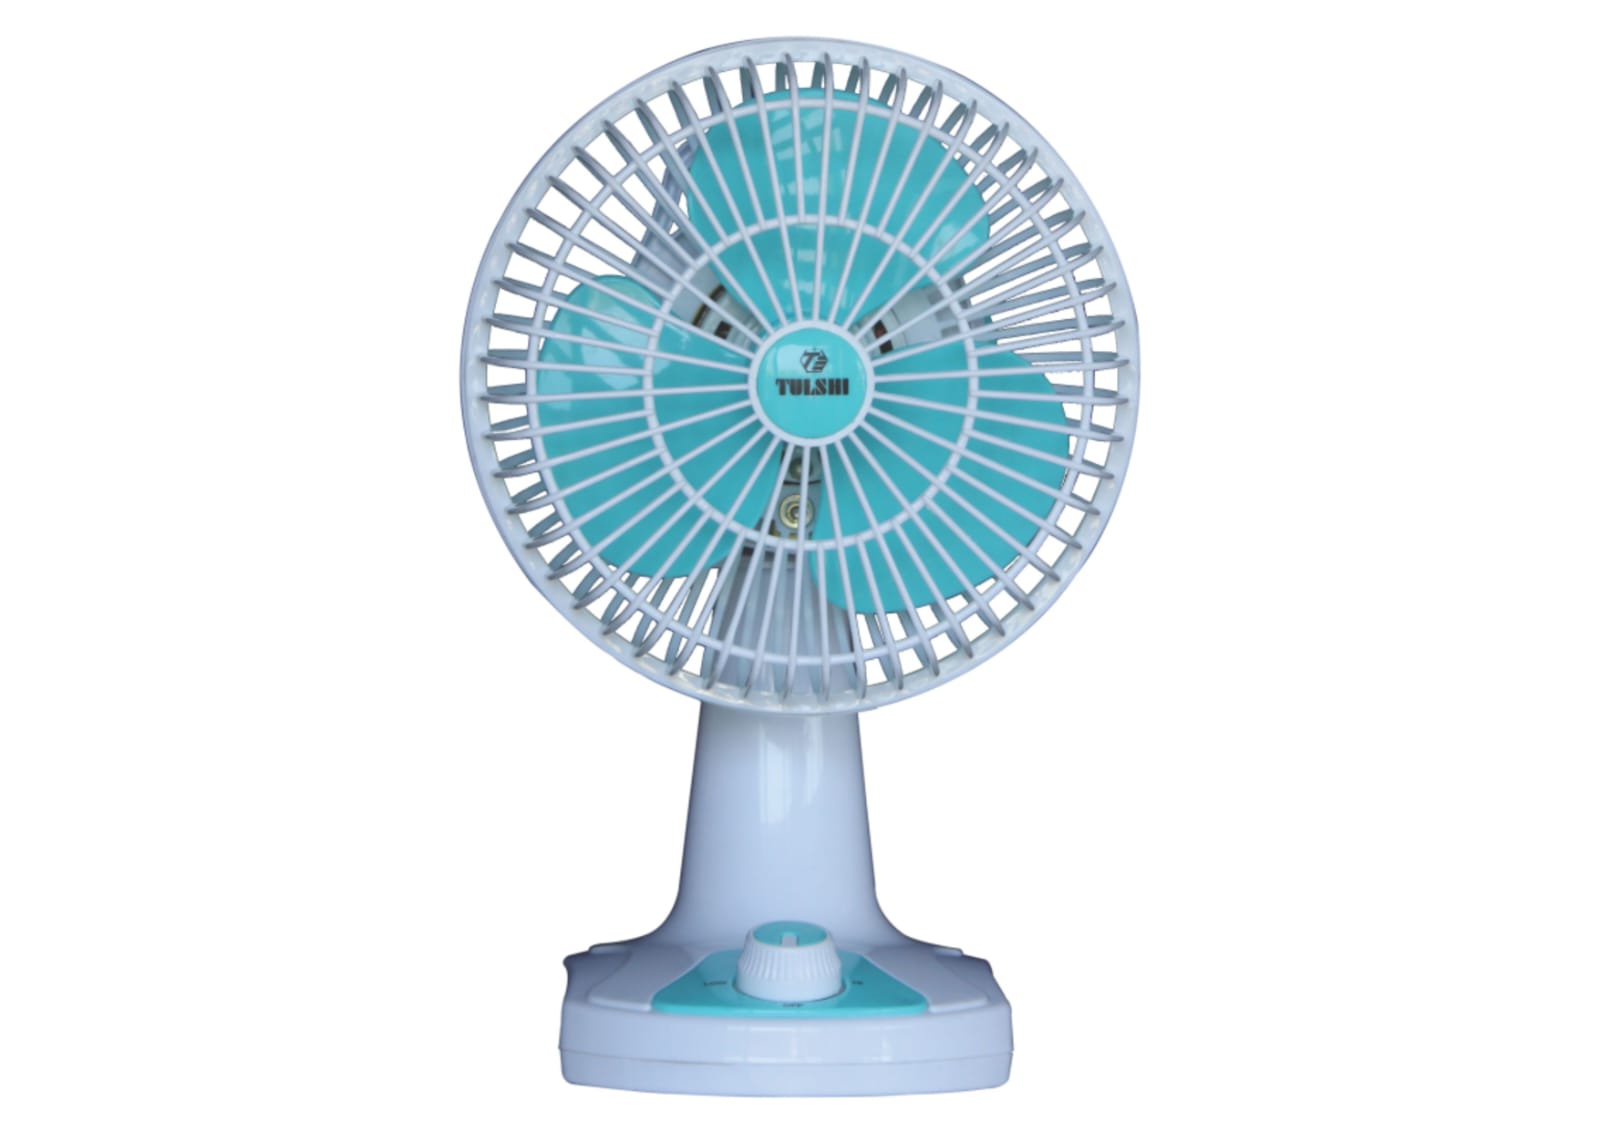 https://tulshielectronics.com/storage/images/products/A.P UTILITY FAN 6,9,12.77_643d10b38f14d.jpg